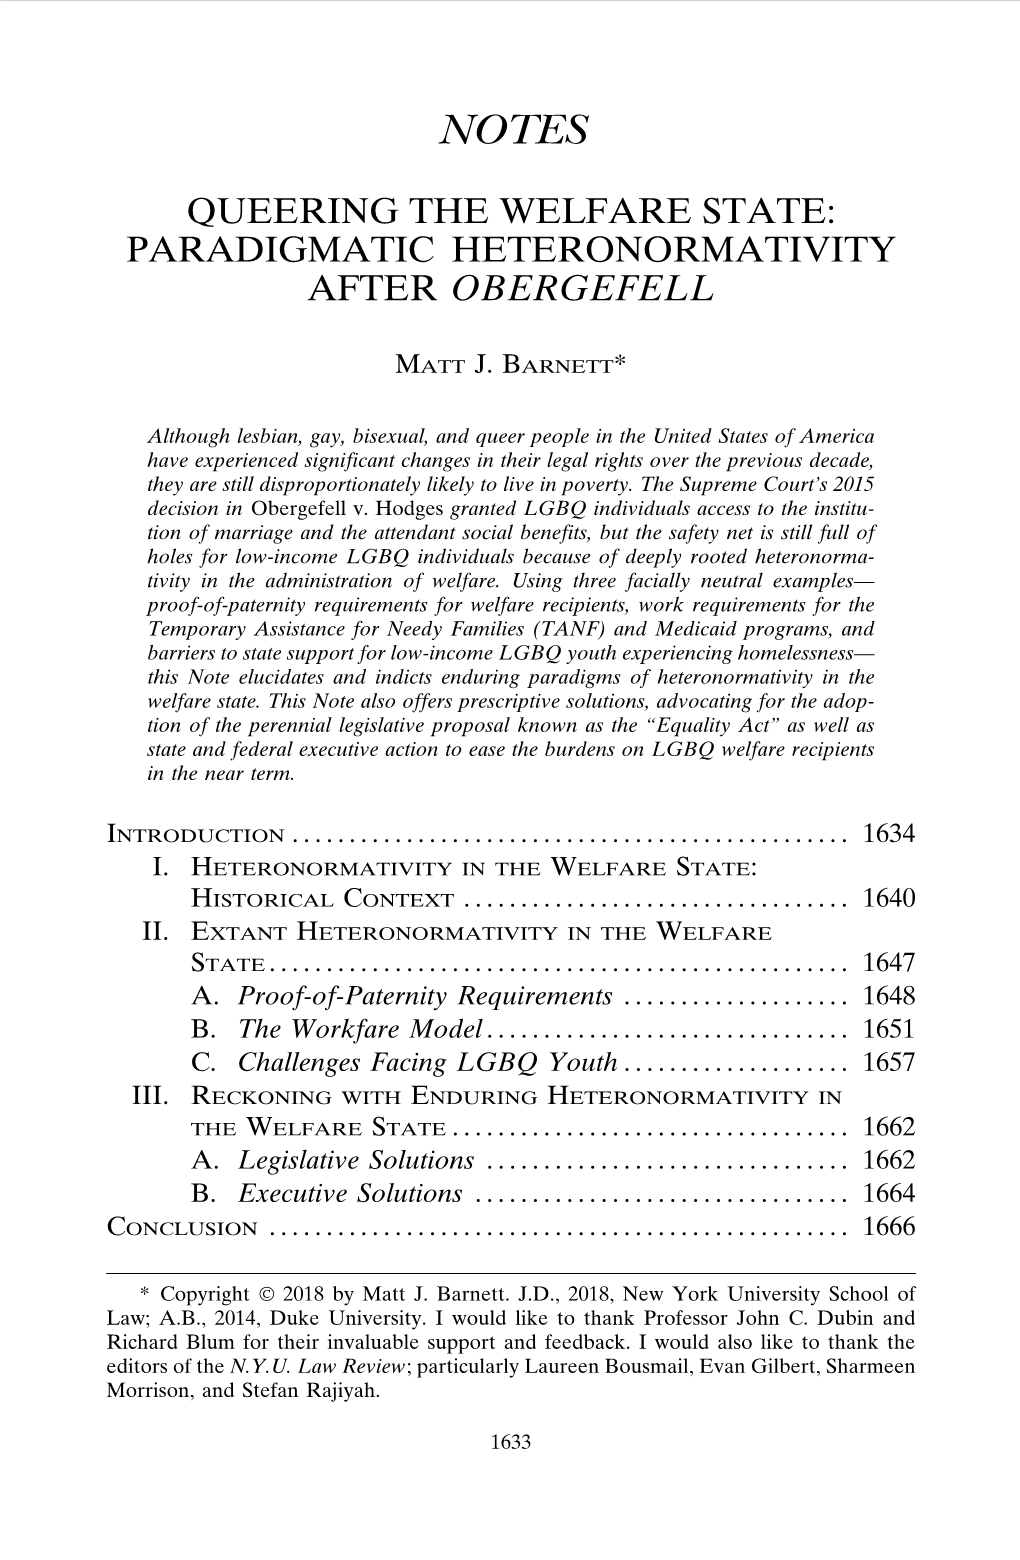 Queering the Welfare State: Paradigmatic Heteronormativity After Obergefell